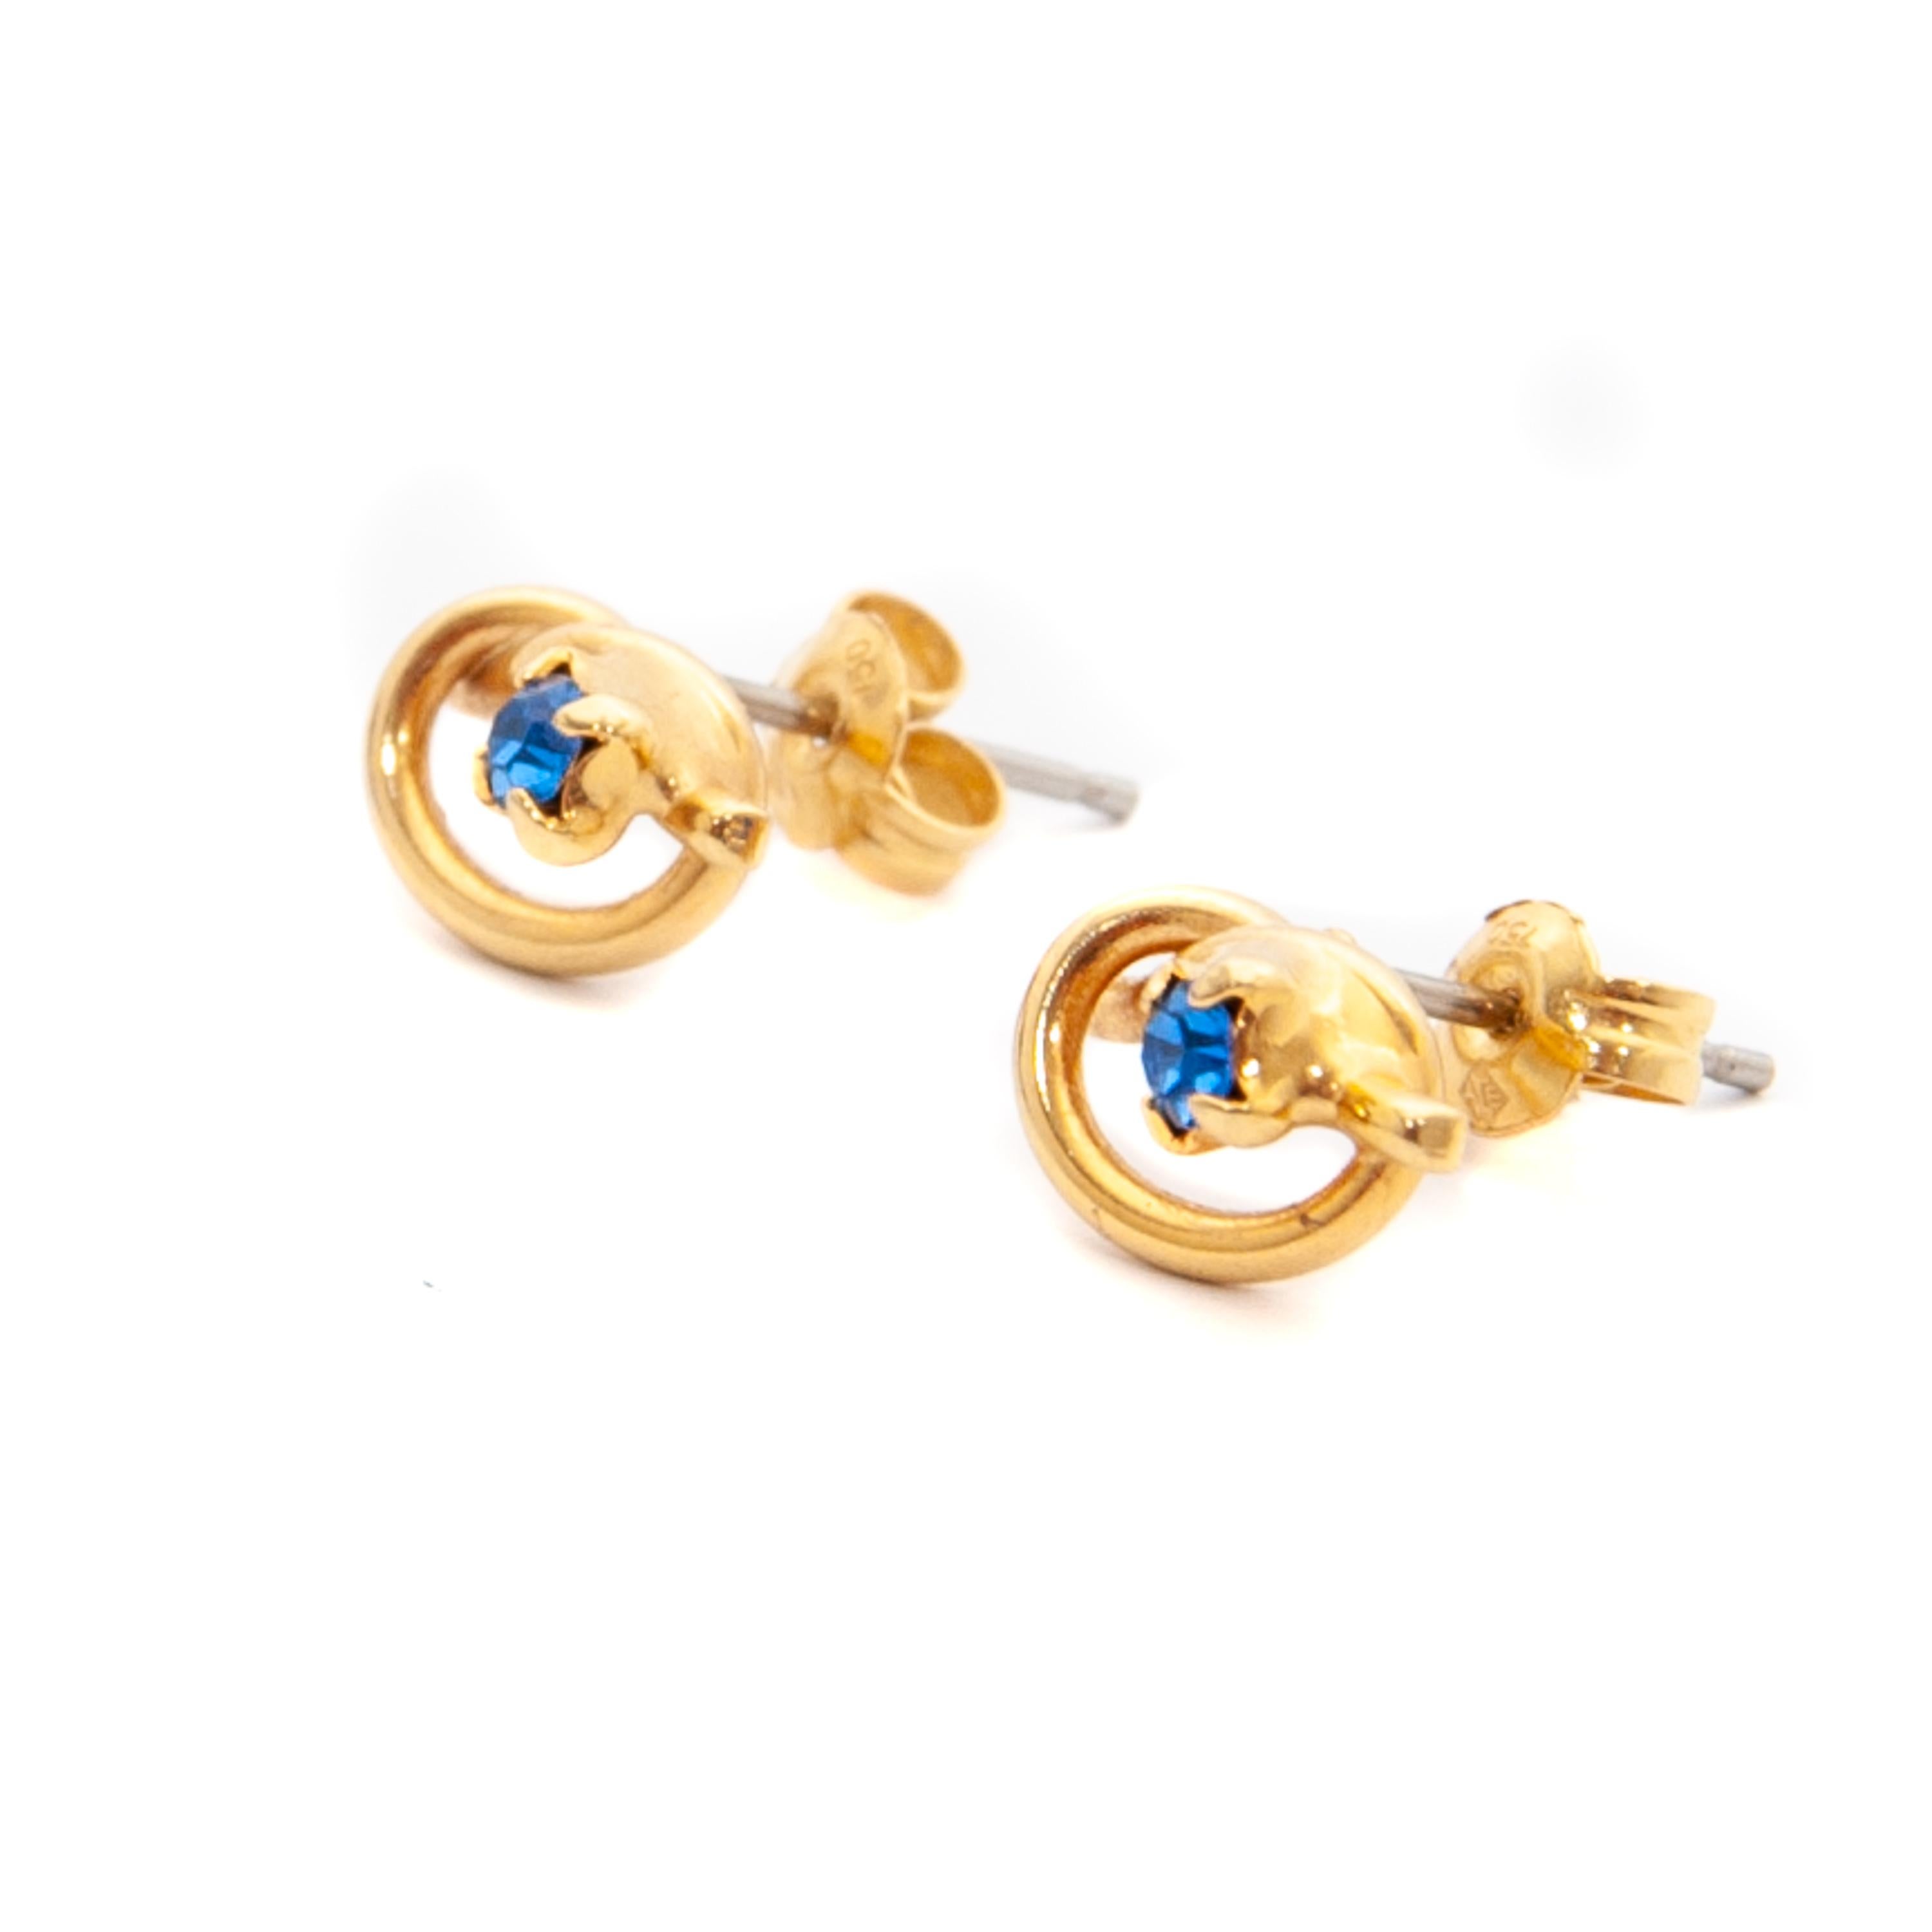 These lovely sapphire love knot stud earrings are made in 18 karat yellow gold. The earrings are set with beautiful brilliant cut blue sapphire gemstones. The sapphires are firmly prong set in the 18 karat gold knotted frame. The earrings are set